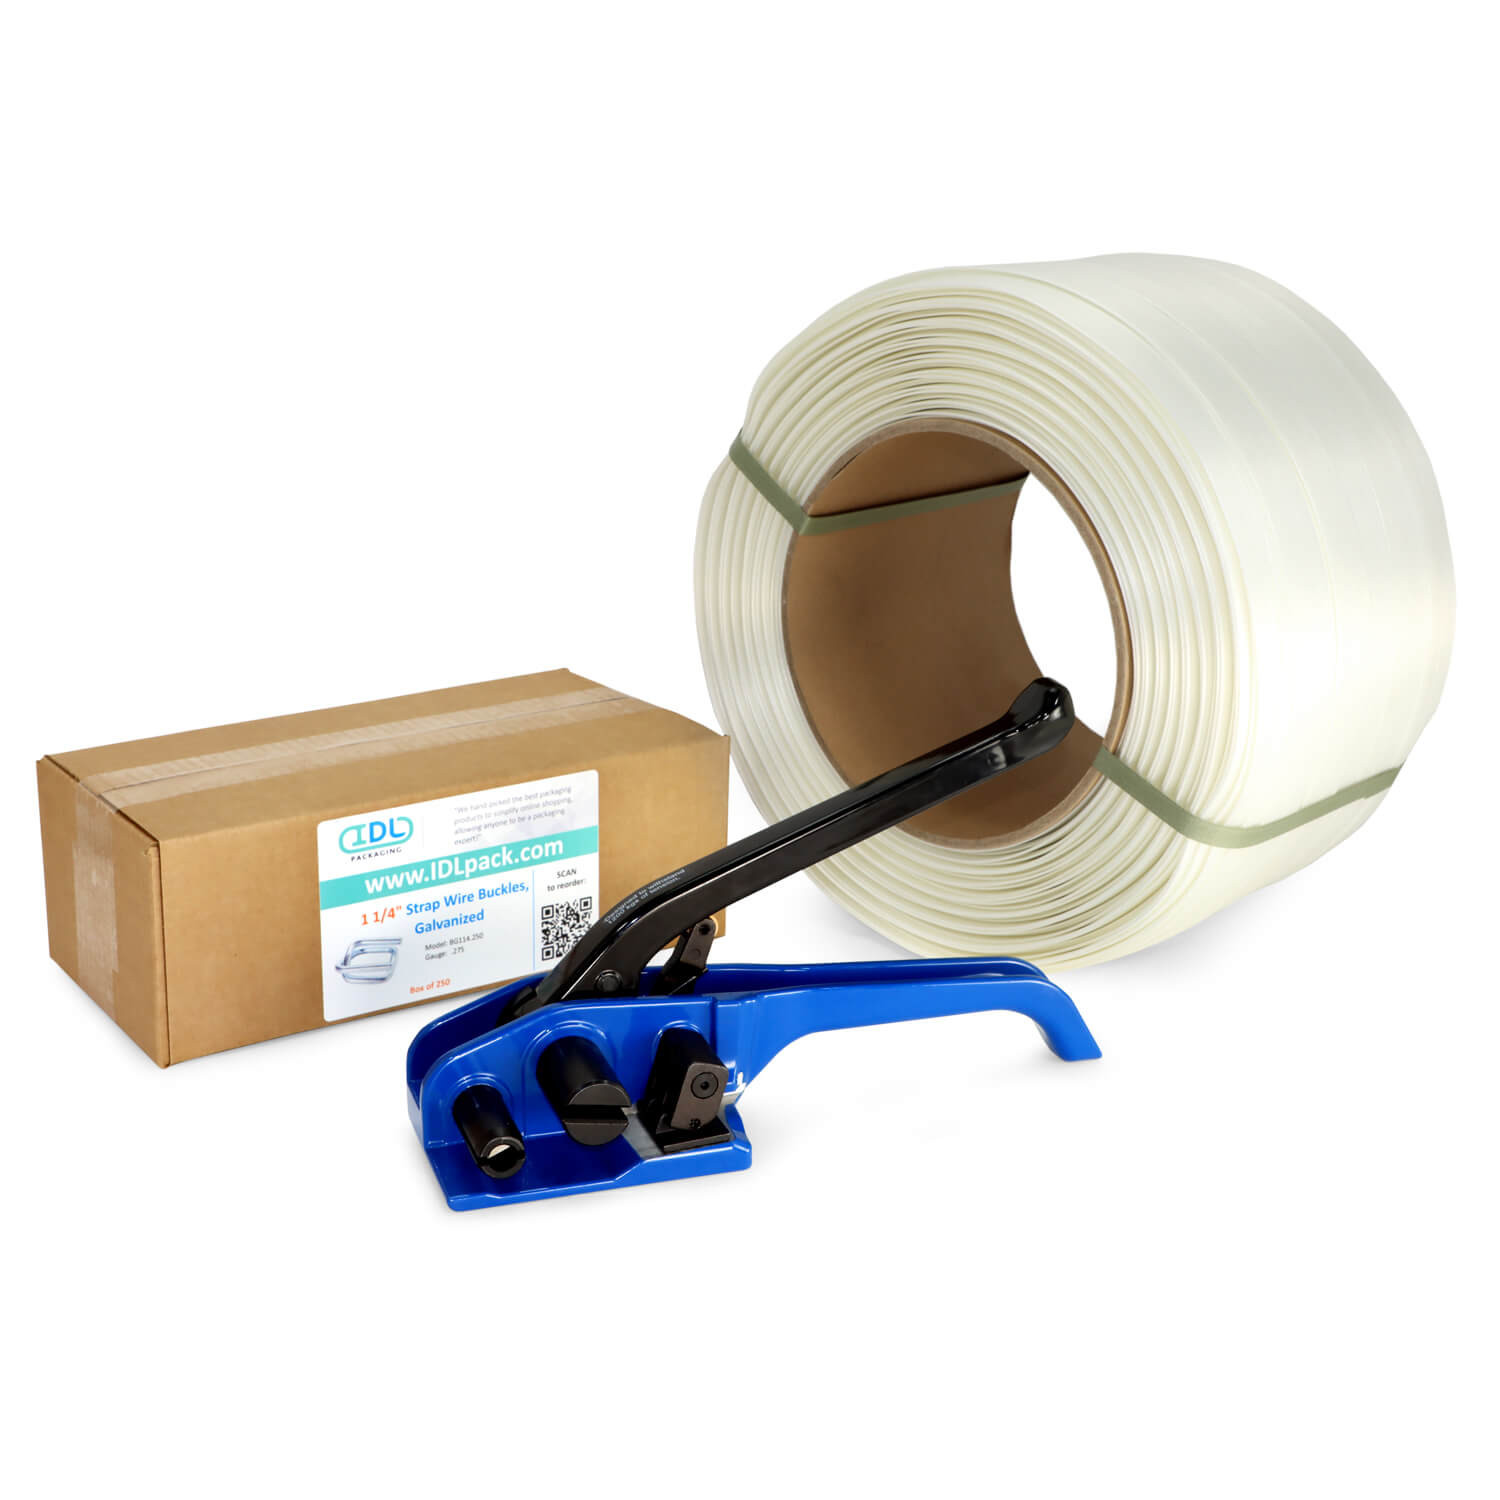 Painters Masking Tape - Harbor Freight Tools